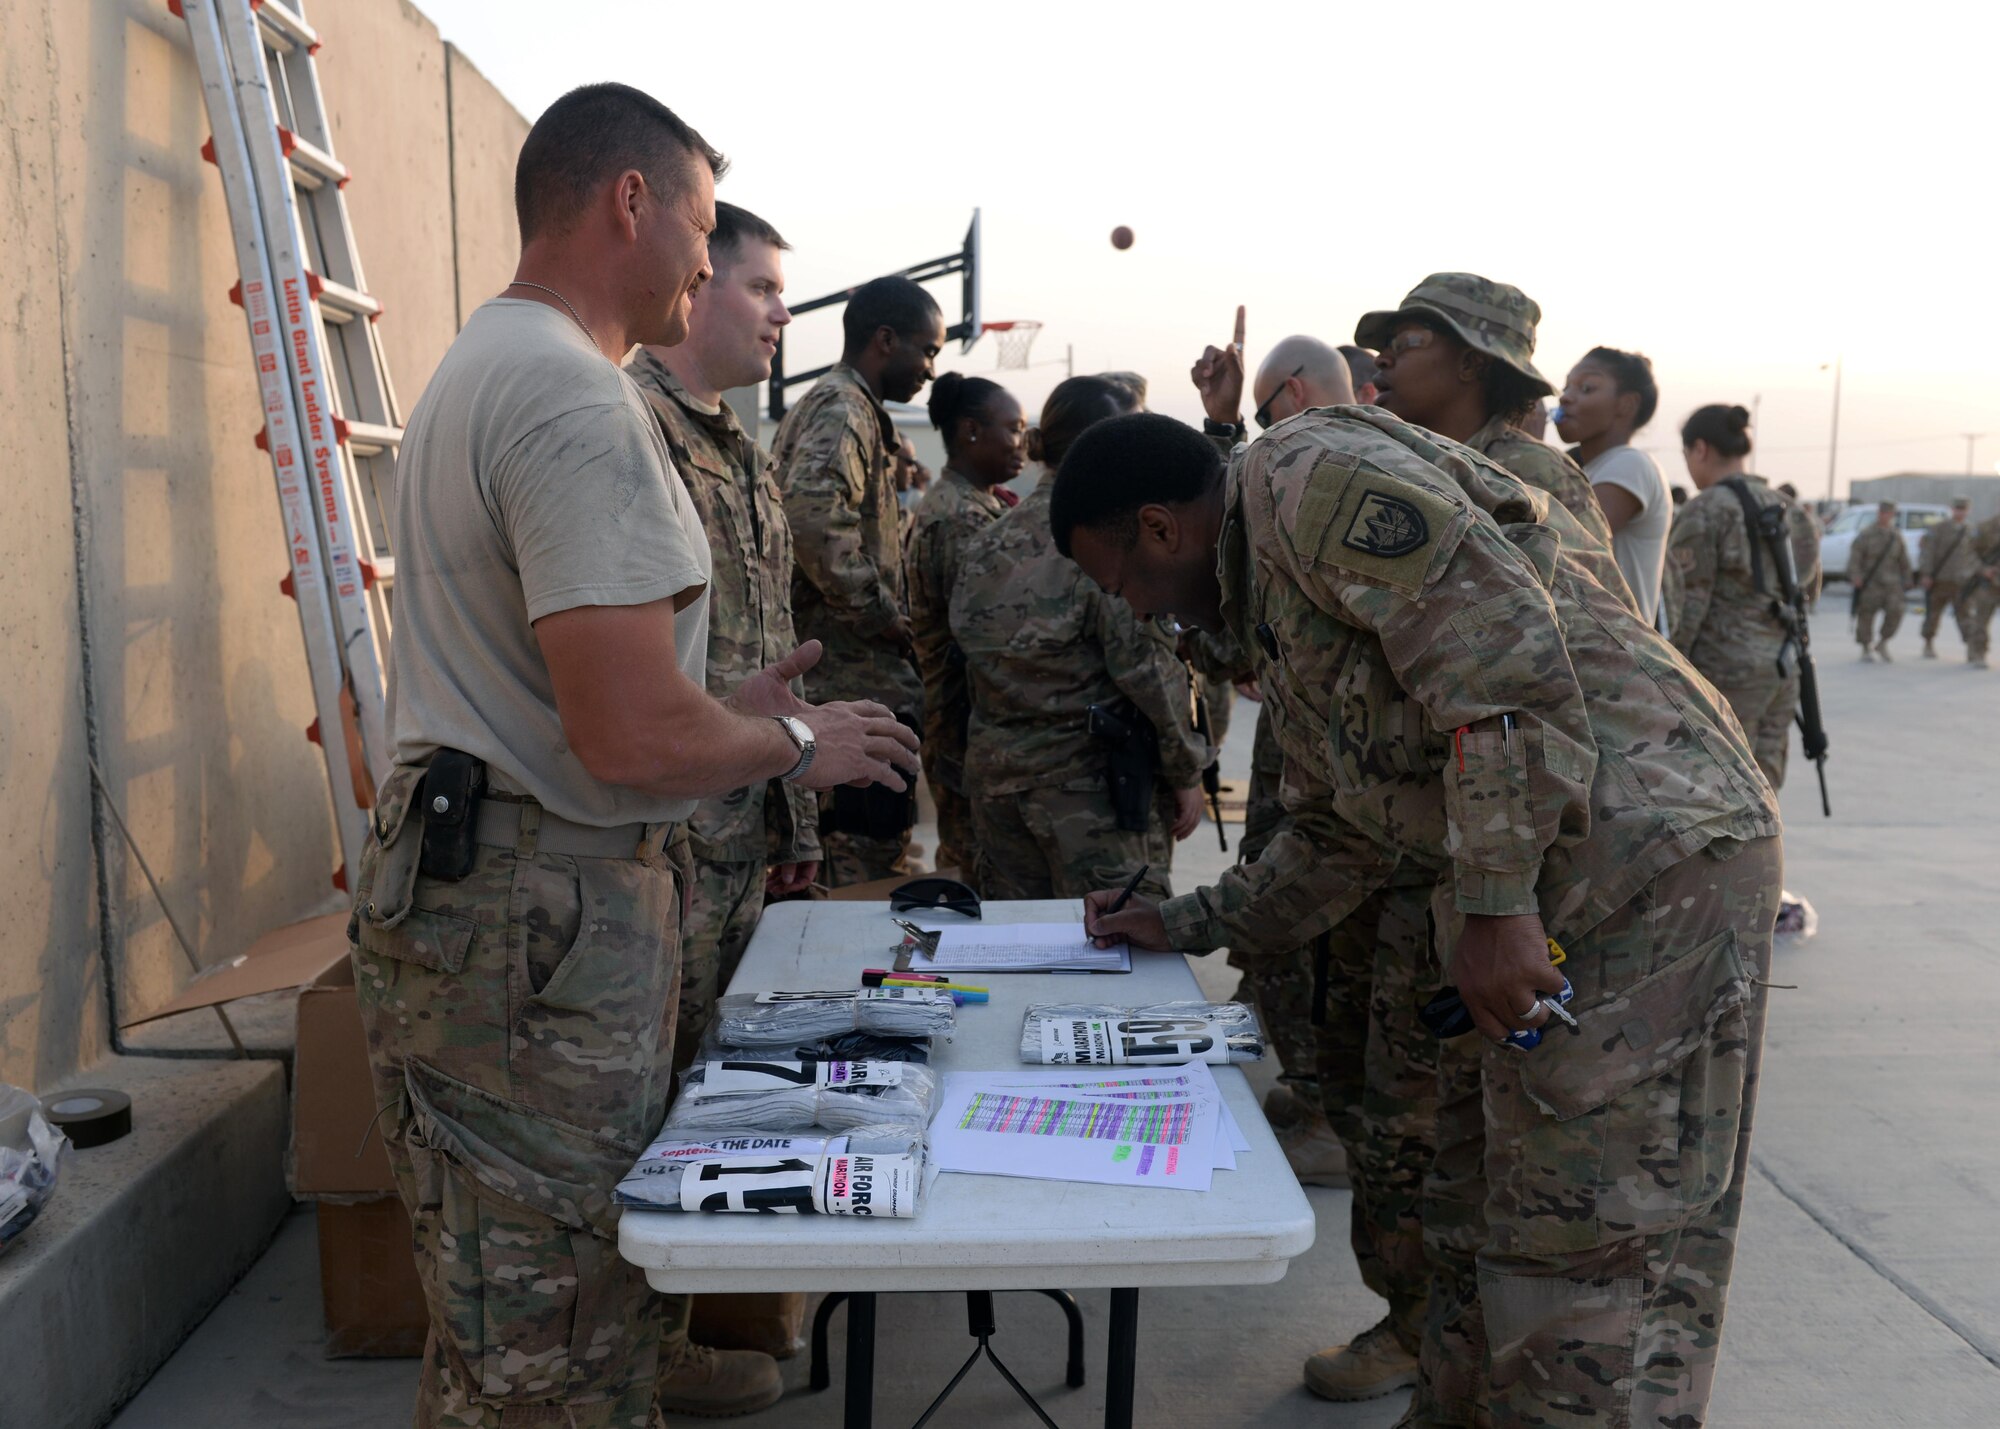 U.S. Airmen assigned to the 455th Air Expeditionary Wing sign up for the Air Force Marathon during an Air Force birthday celebration Sept. 18, 2015, at Bagram Airfield, Afghanistan. The block party which was hosted by the Armed Forces Committed to Excellence council, the 455th Force Support Squadron and other private organizations featured games, food and a traditional AF cake cutting ceremony. (U.S. Air Force photo by Senior Airman Cierra Presentado/Released)